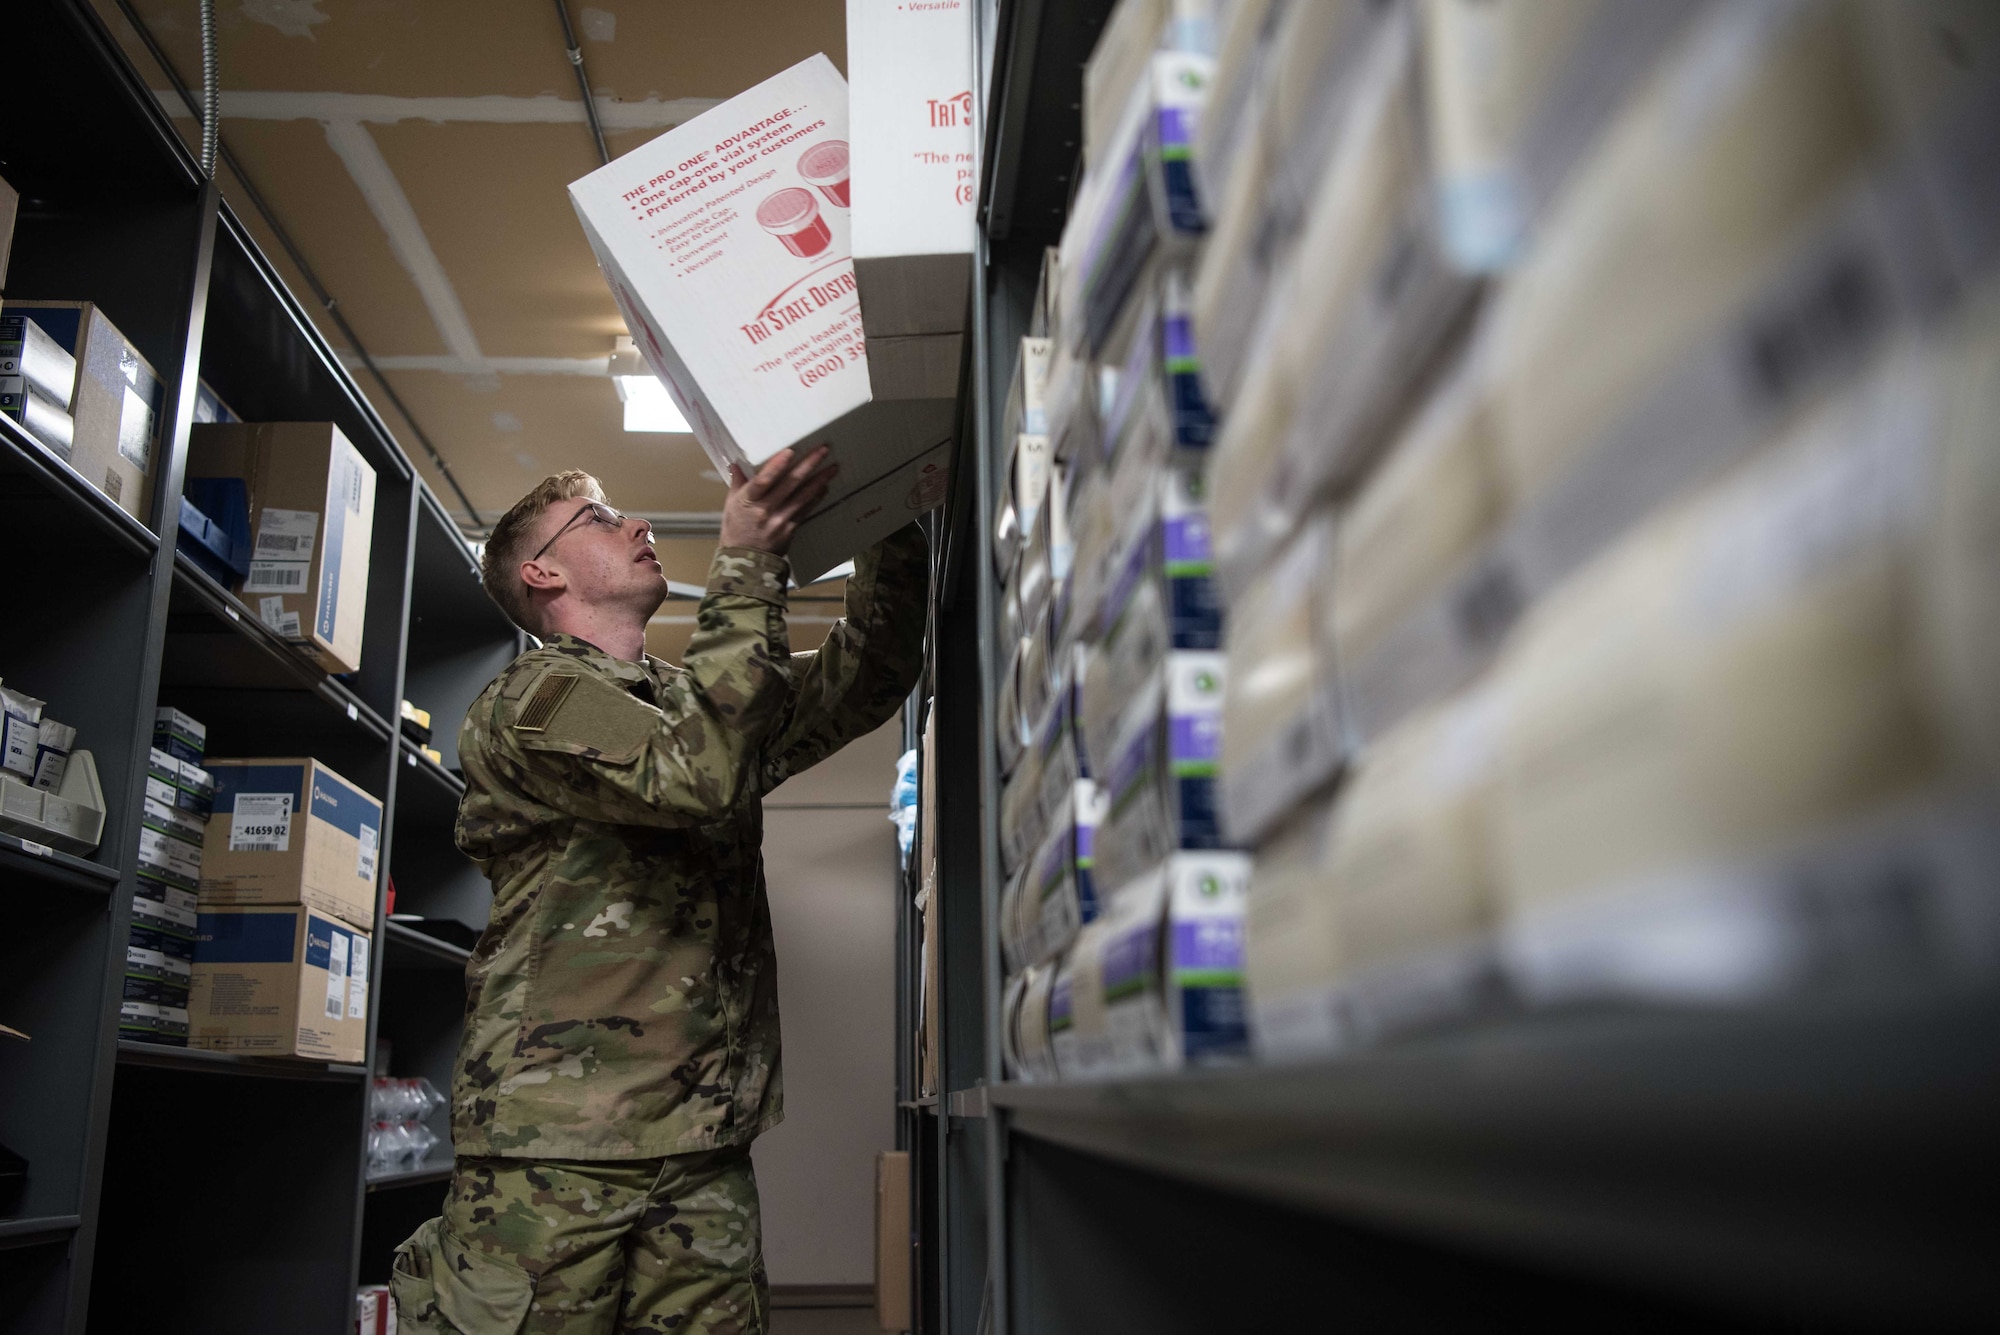 U.S. Air Force Airman 1st Class Bailey Pitcher, 22nd Medical Support Squadron acquisitions technician, prepares equipment at McConnell Air Force Base, Kansas, July 15, 2020. Medical material Airmen can receive an average of four to five shipments a day. Once the medical material team receives packages, they are opened, logged and delivered to the requesting clinic. (U.S. Air Force photo by Senior Airman Alexi Bosarge)